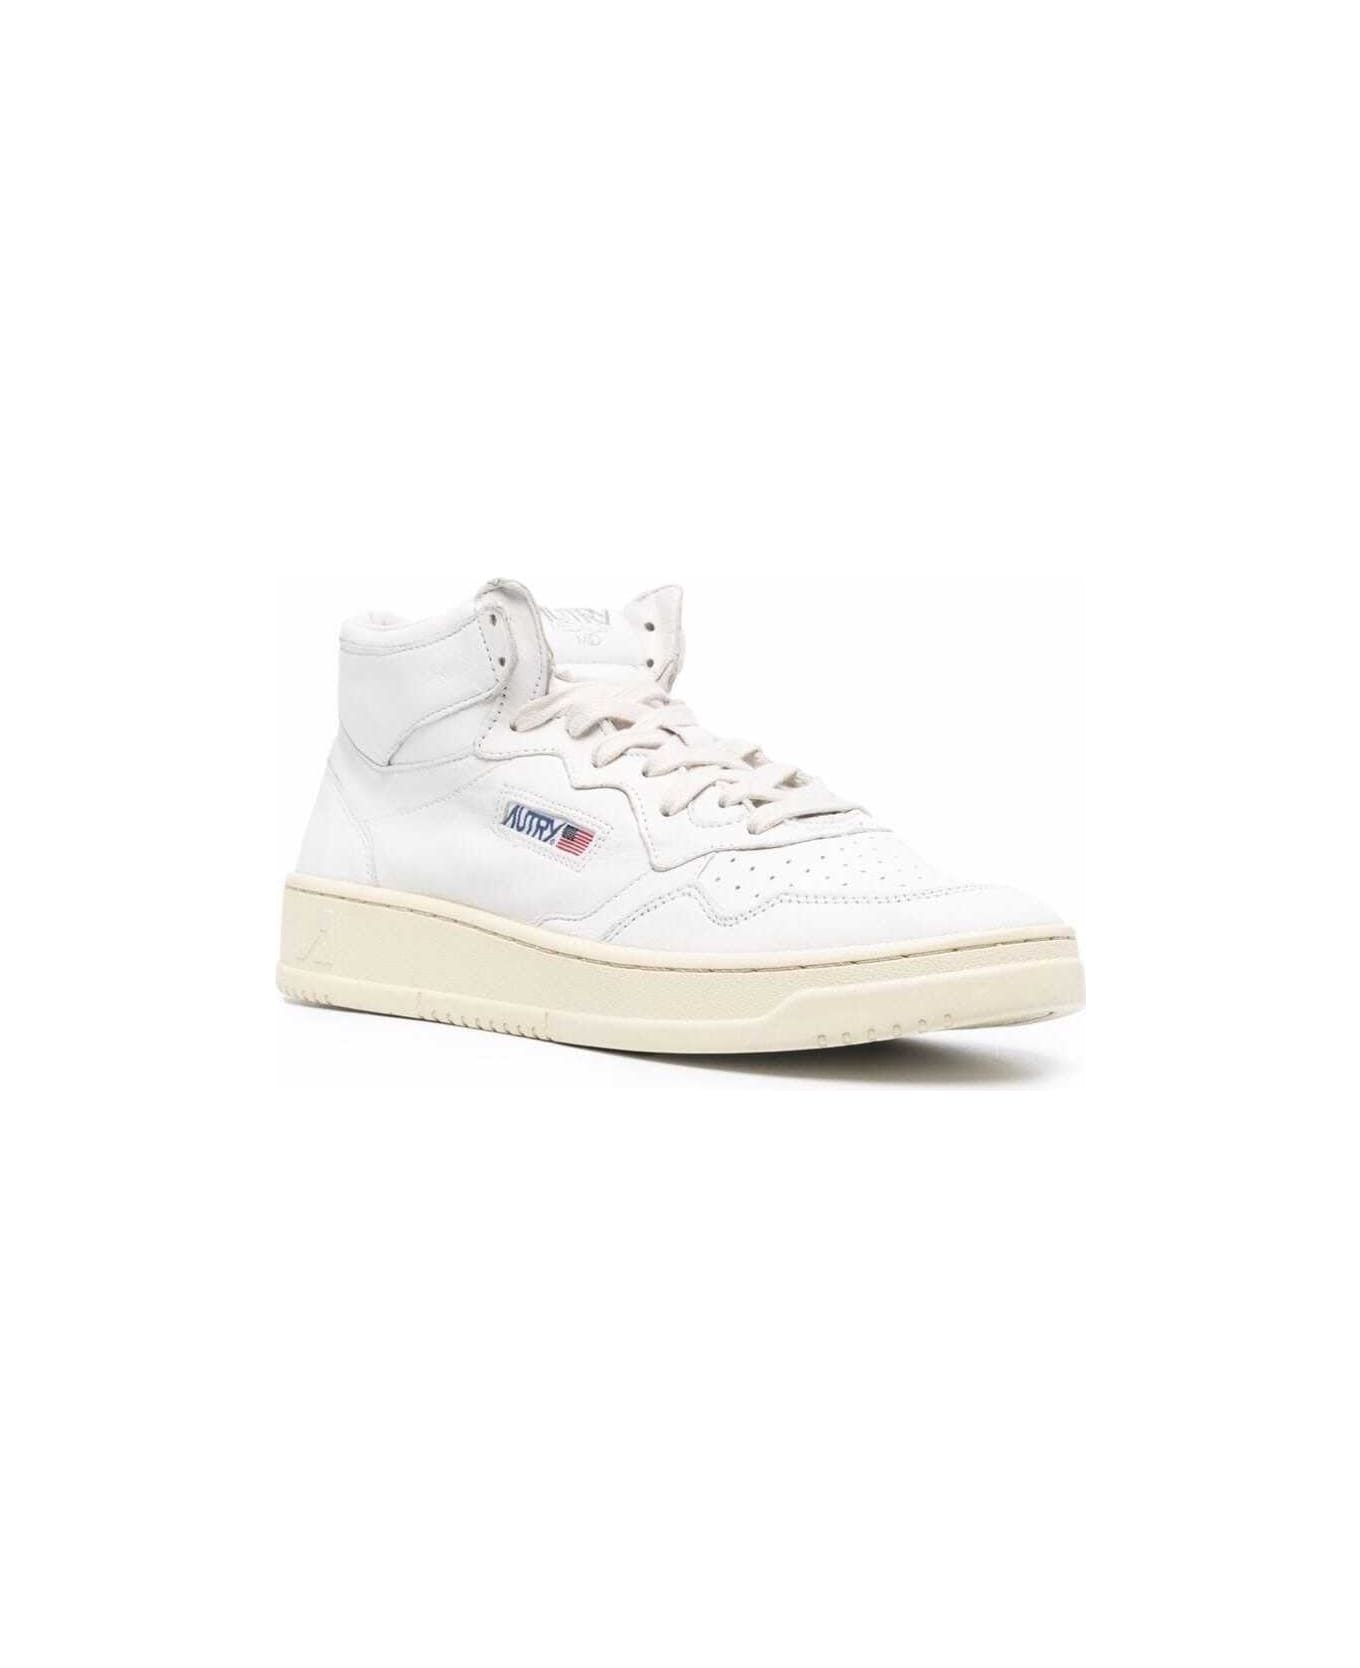 Autry Hig Top White Leather Sneakers With Logo Autry Man - White